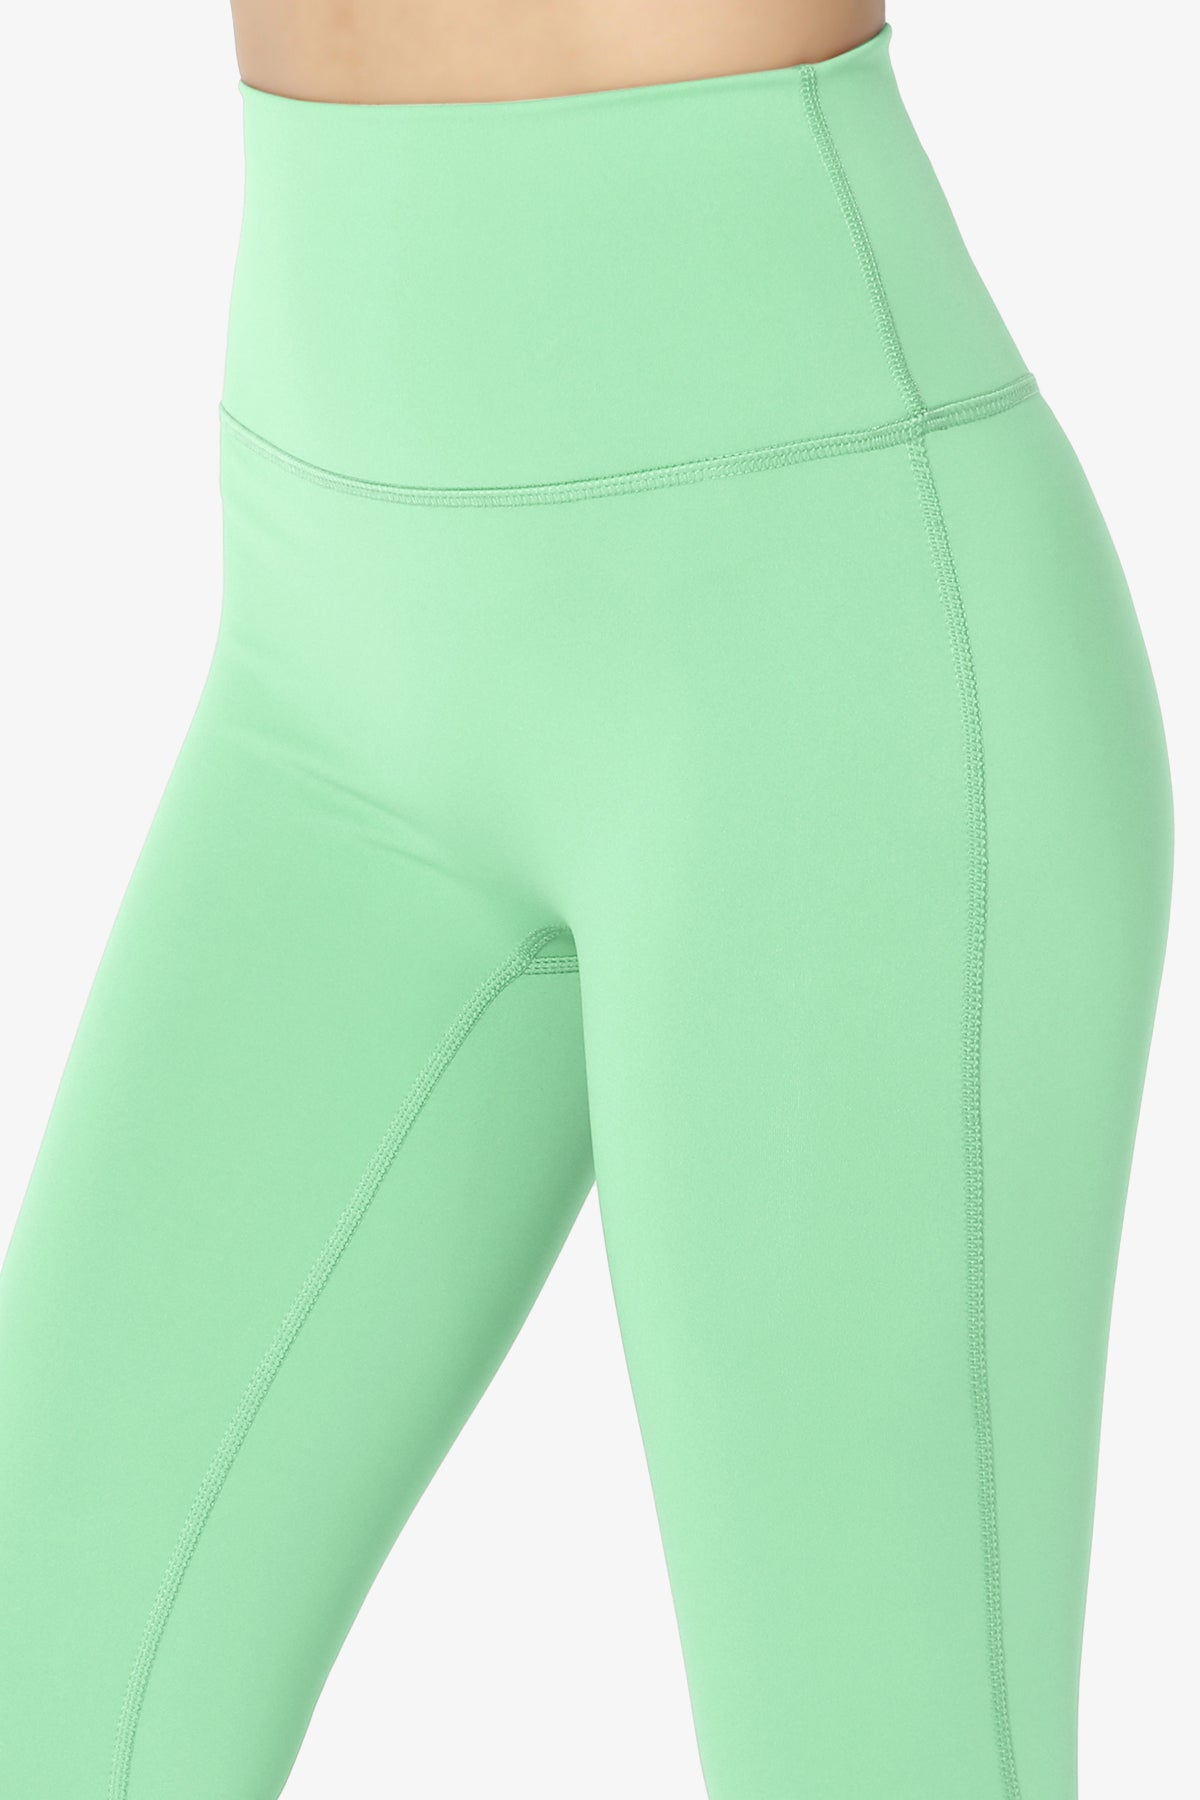 Hfyihgf High Waisted Leggings for Women Soft Comfy Tummy Control Slimming  Yoga Pants for Workout Running(Green,M)